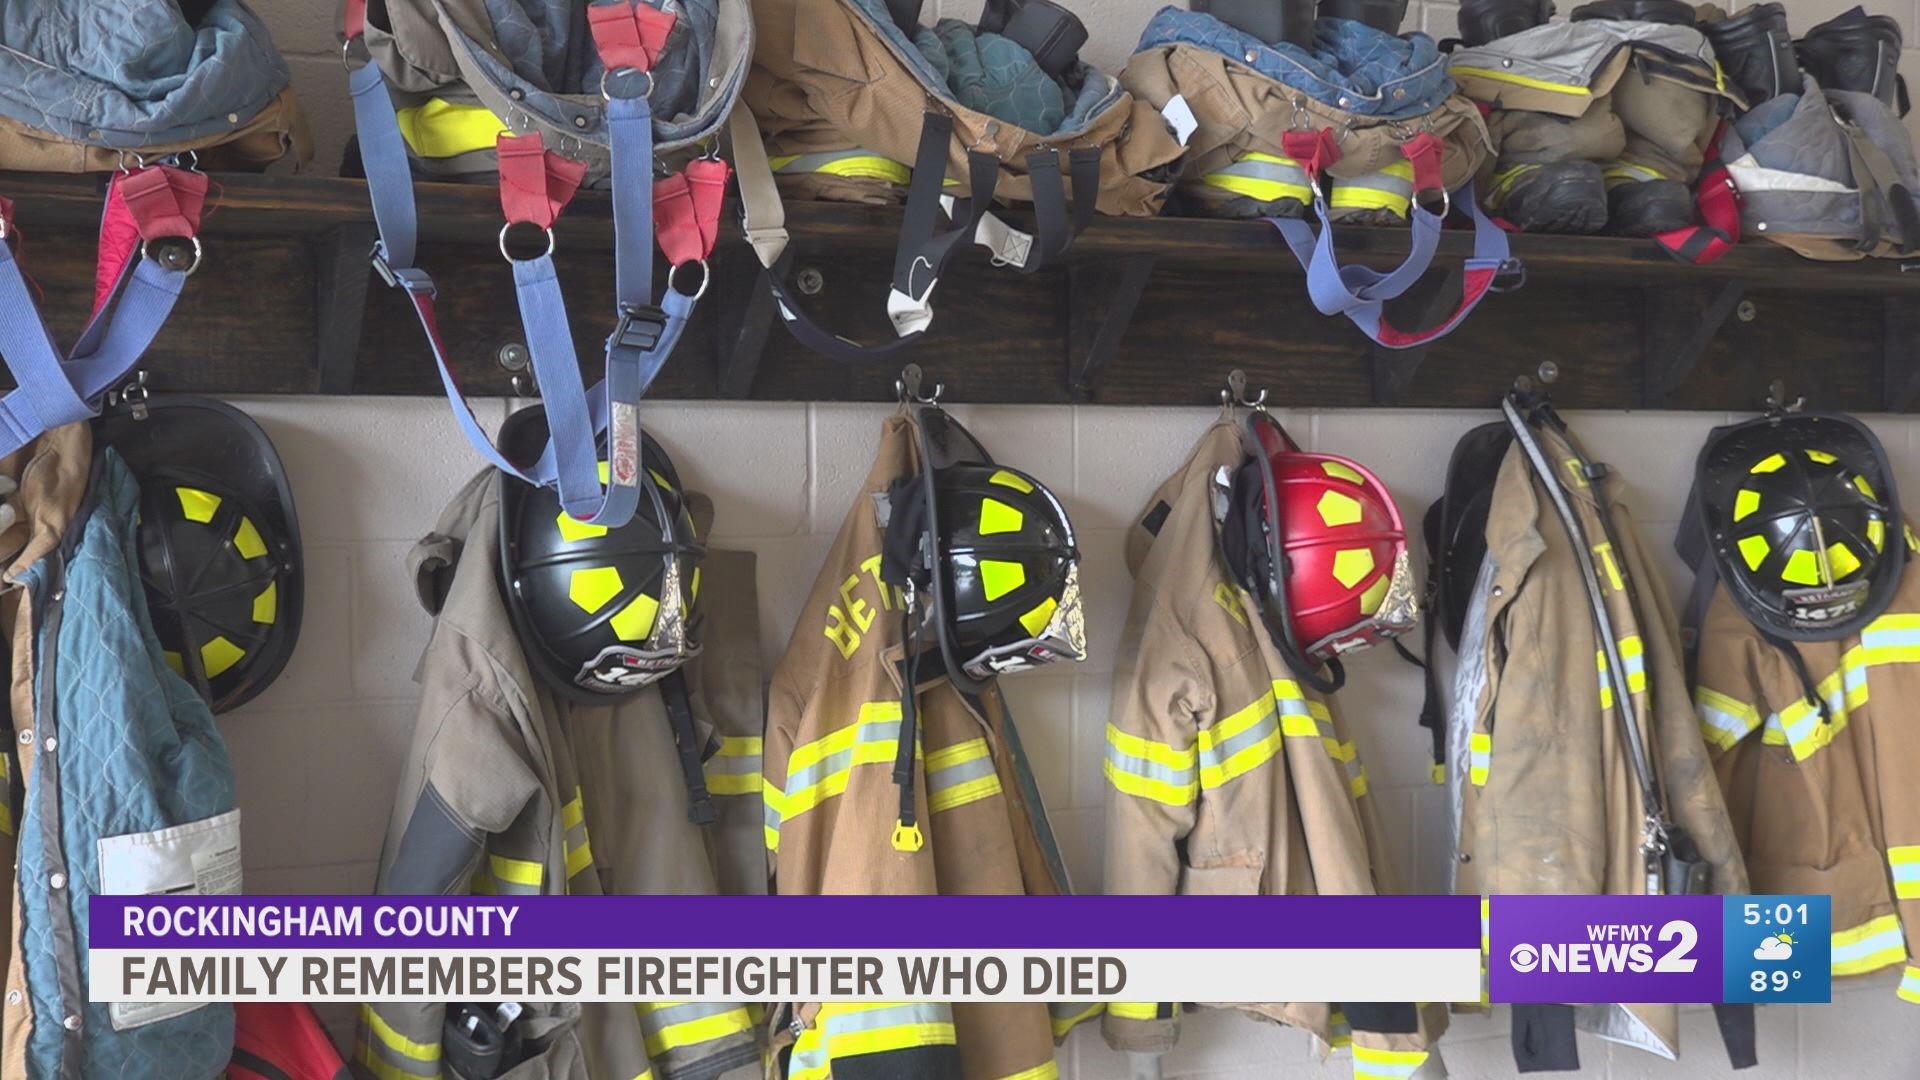 The fire department said firefighter, Brandon Yaeger, died in the line of duty.